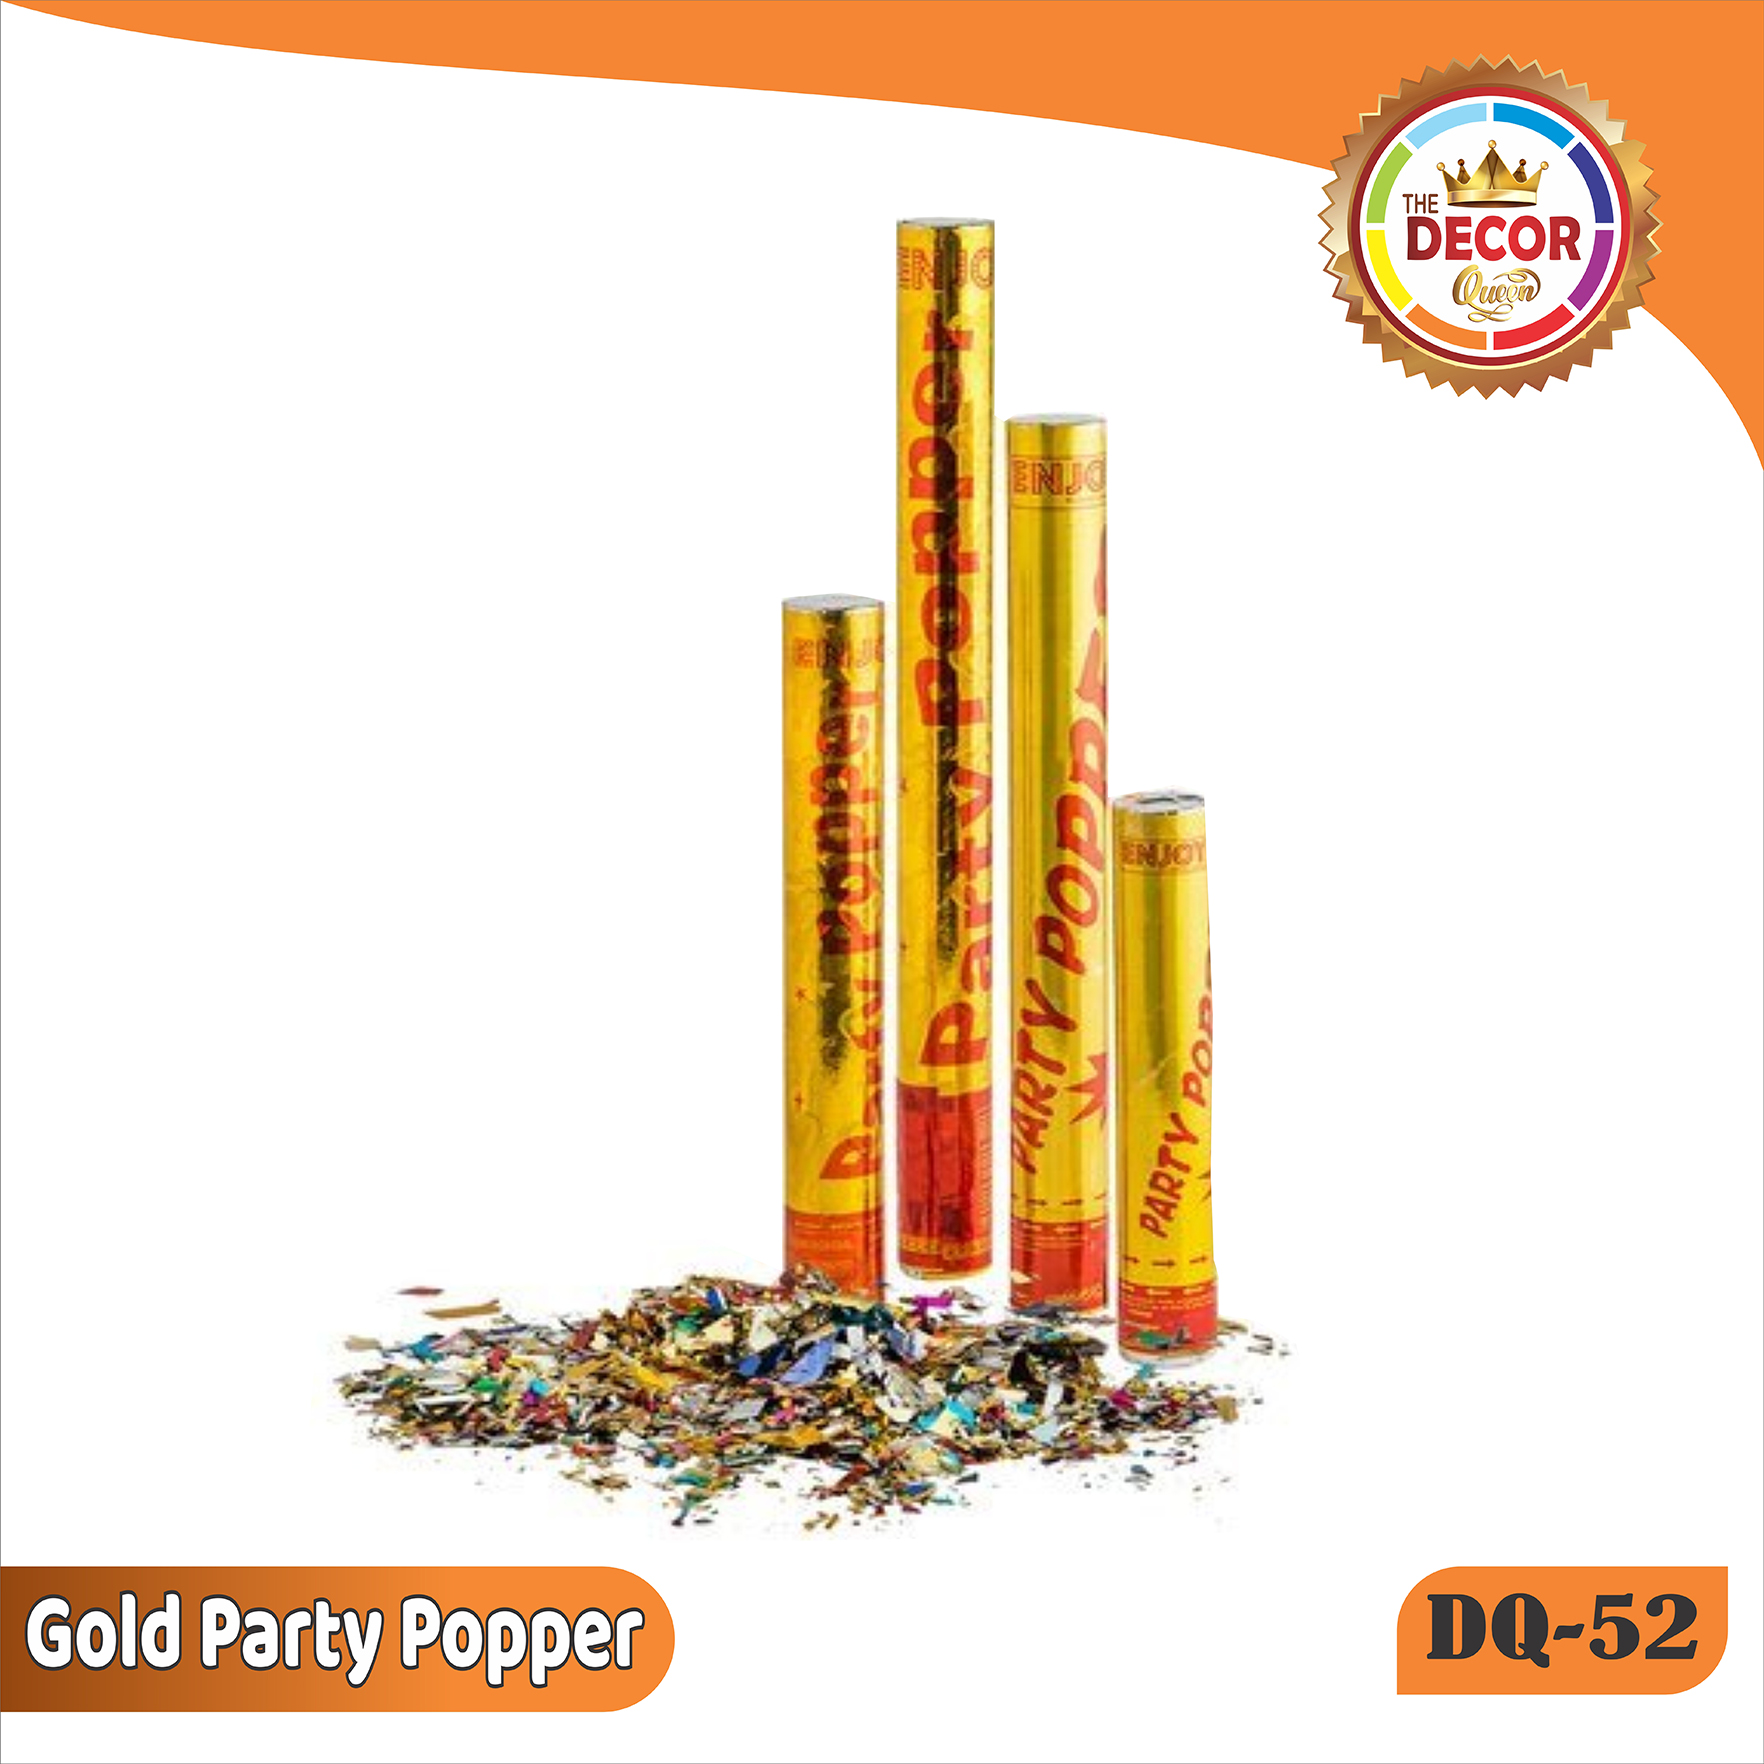 Gold Party Popper (PARTY POPPERS)|Party Products|Party Poppers